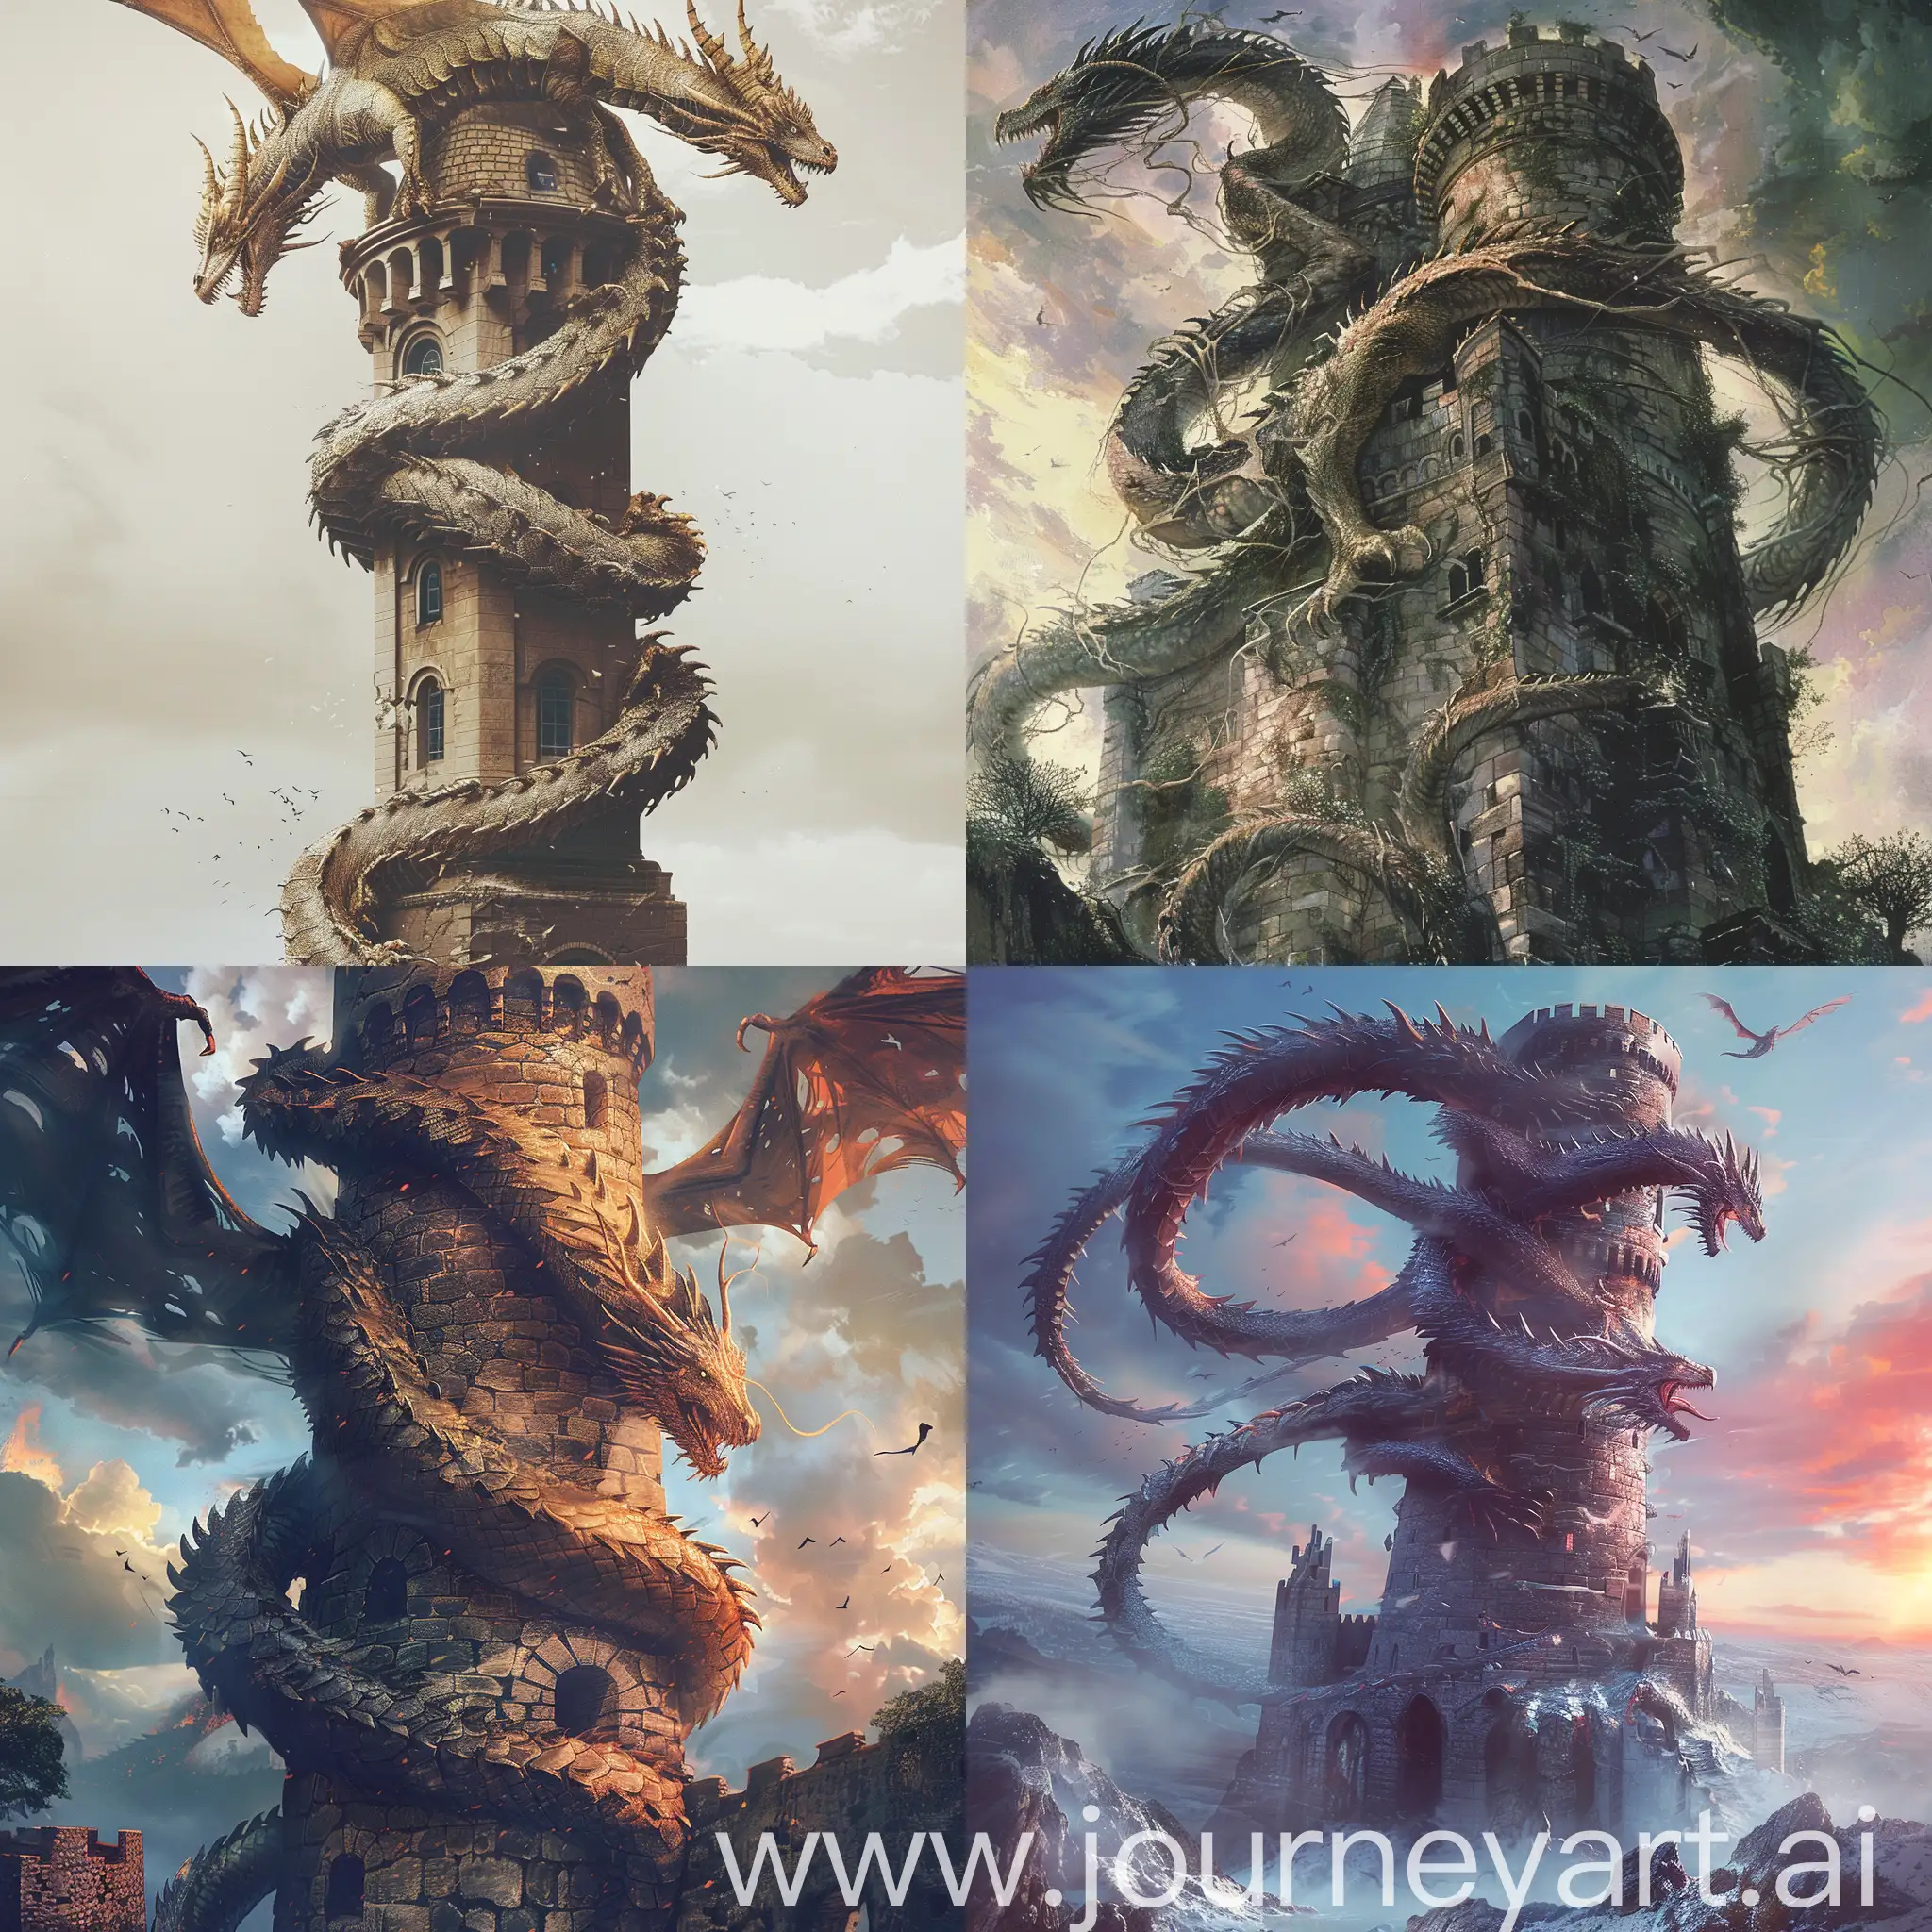 Tower-Enveloped-by-Dragon-Mythical-Creature-Guards-Ancient-Structure